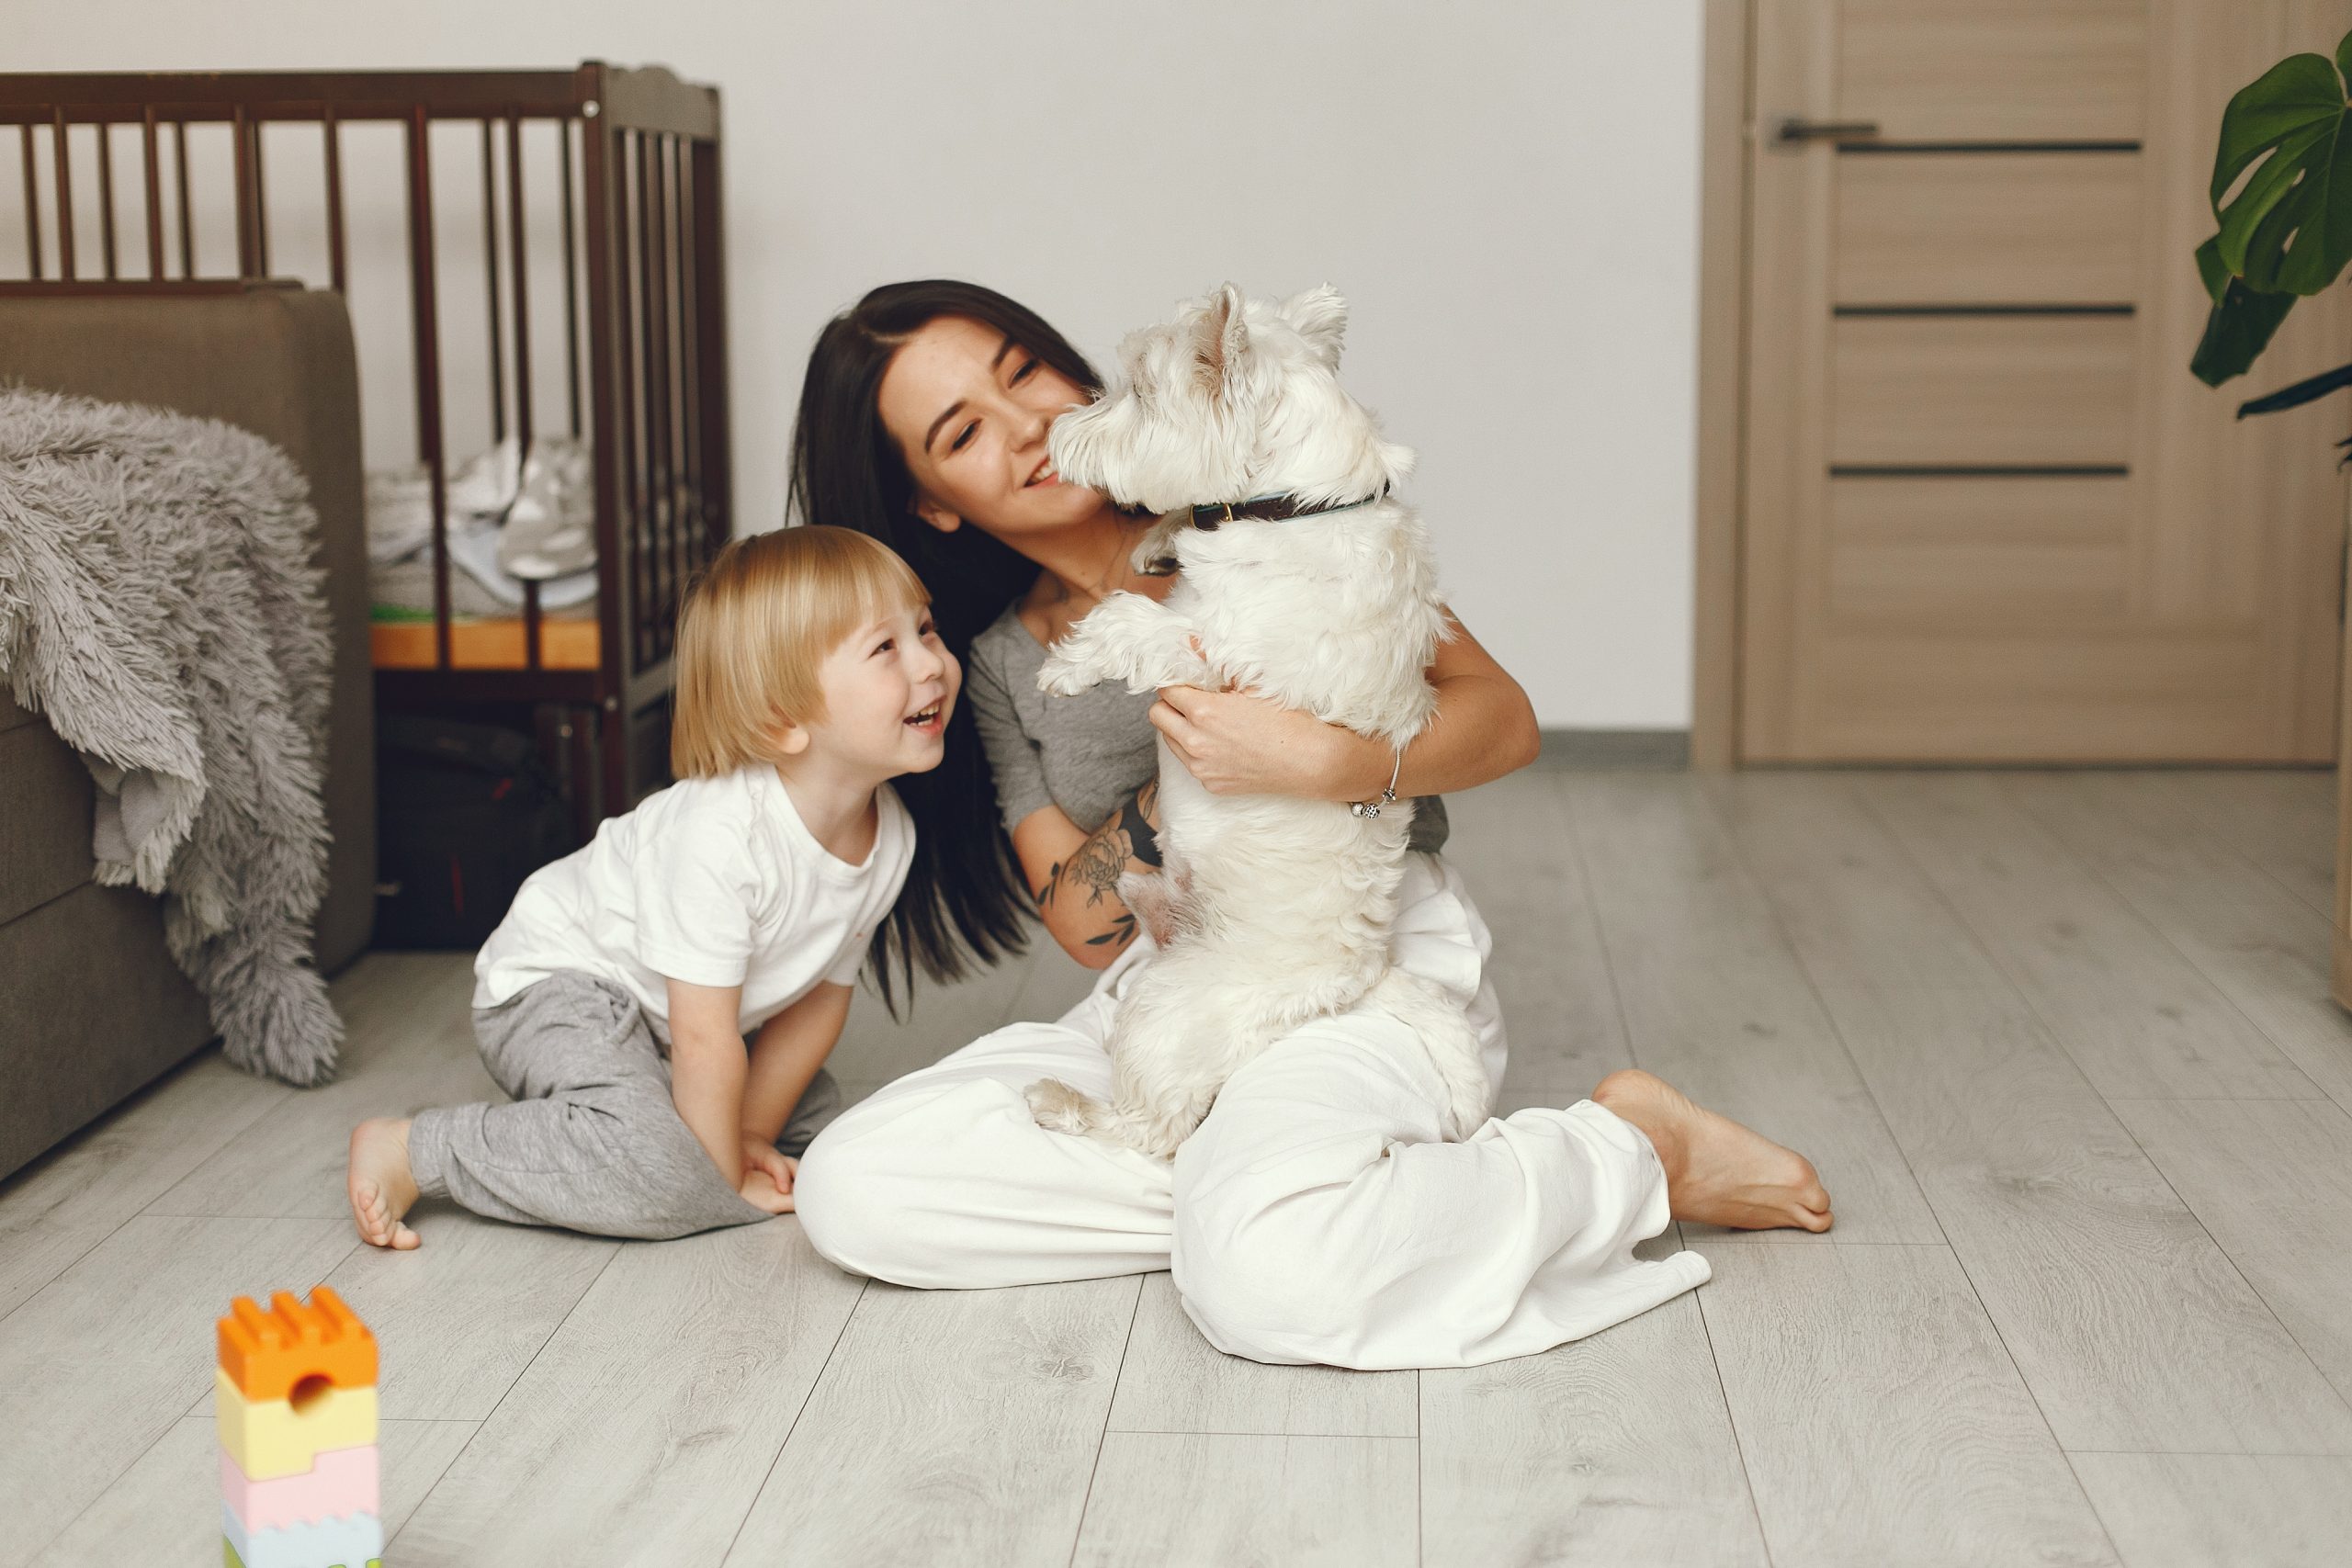 Mother and little son fun at home with dog